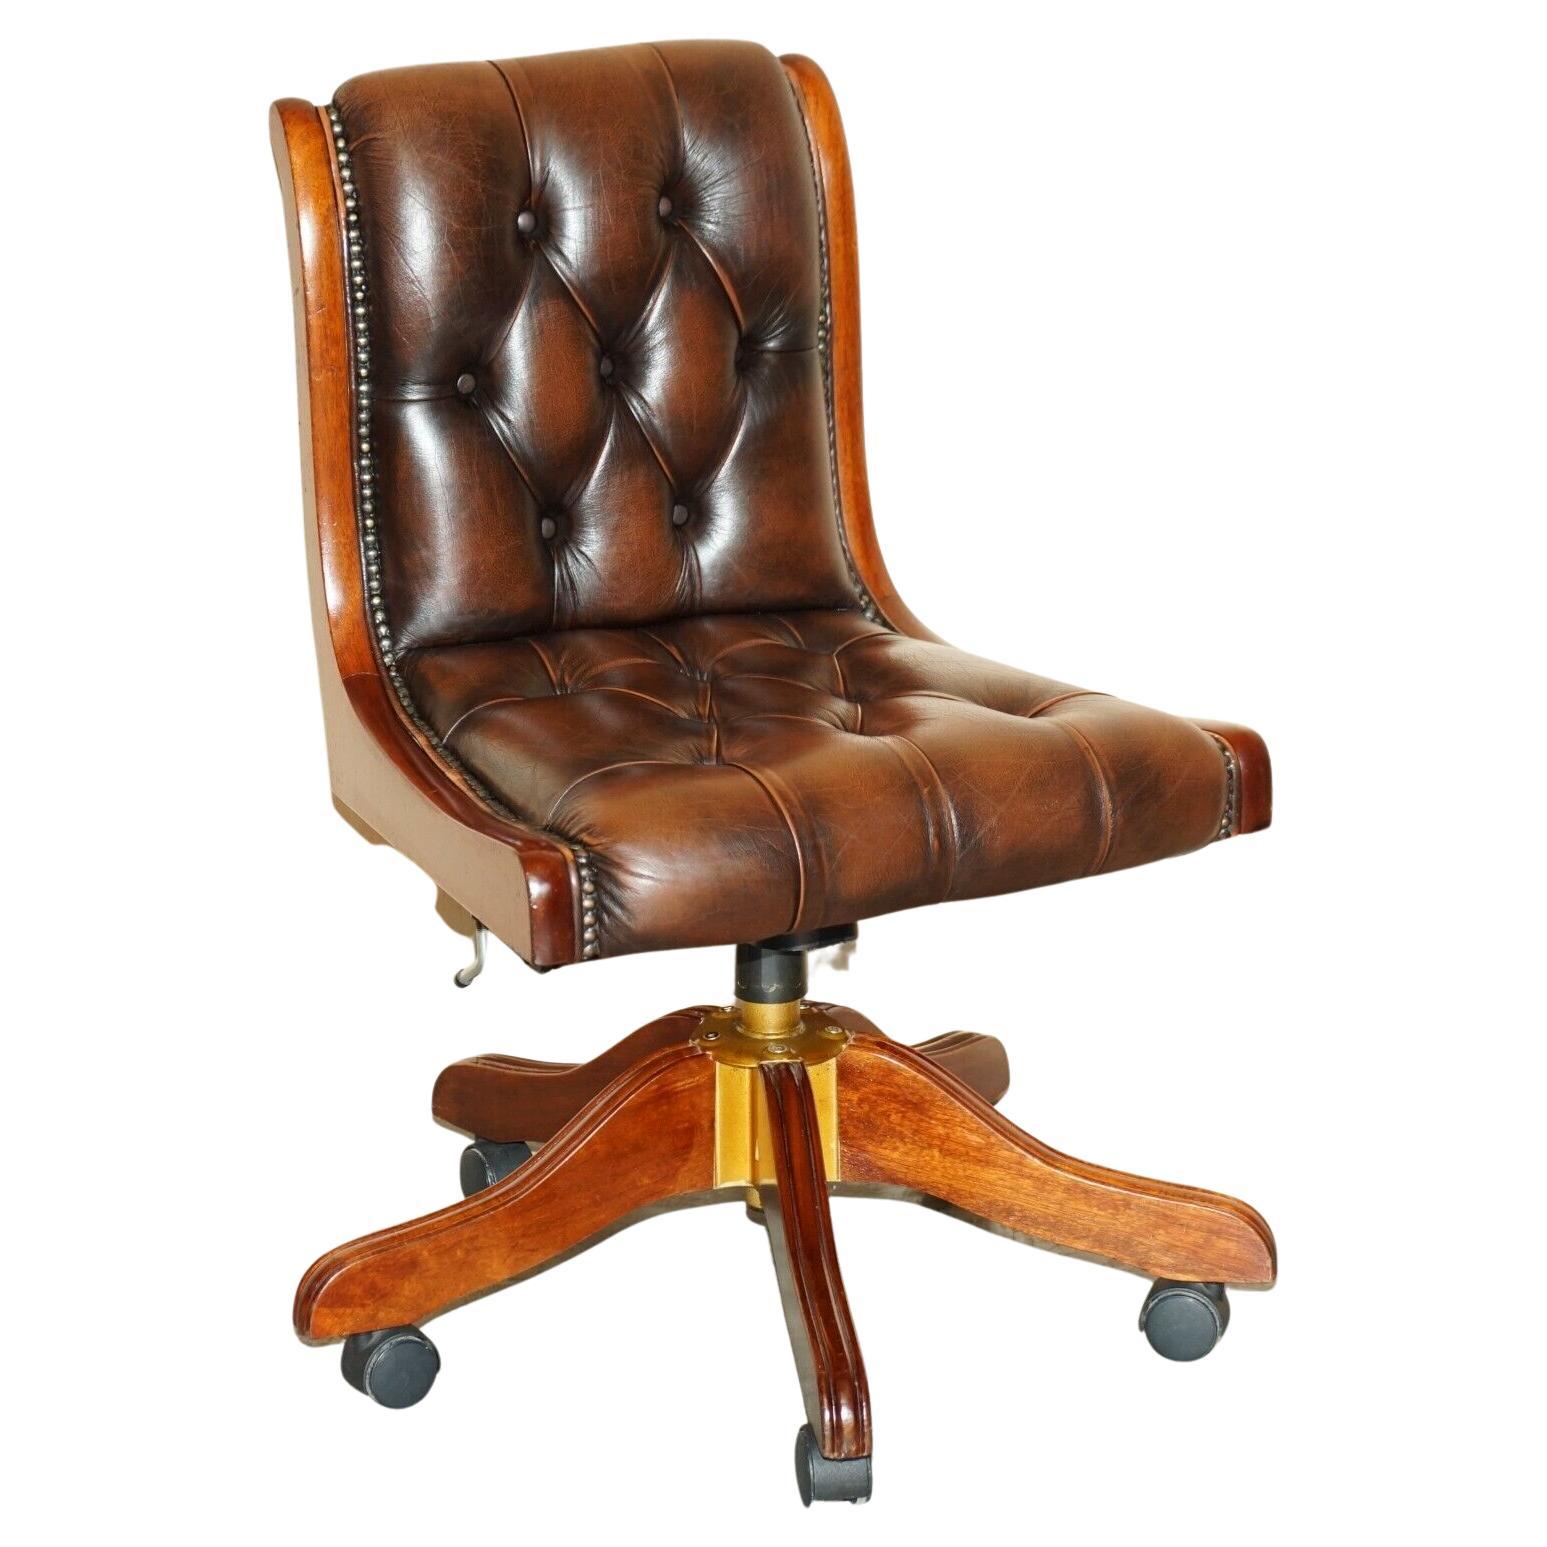 Vintage Chesterfield Leather and Mahogany Framed Office Desk Chair